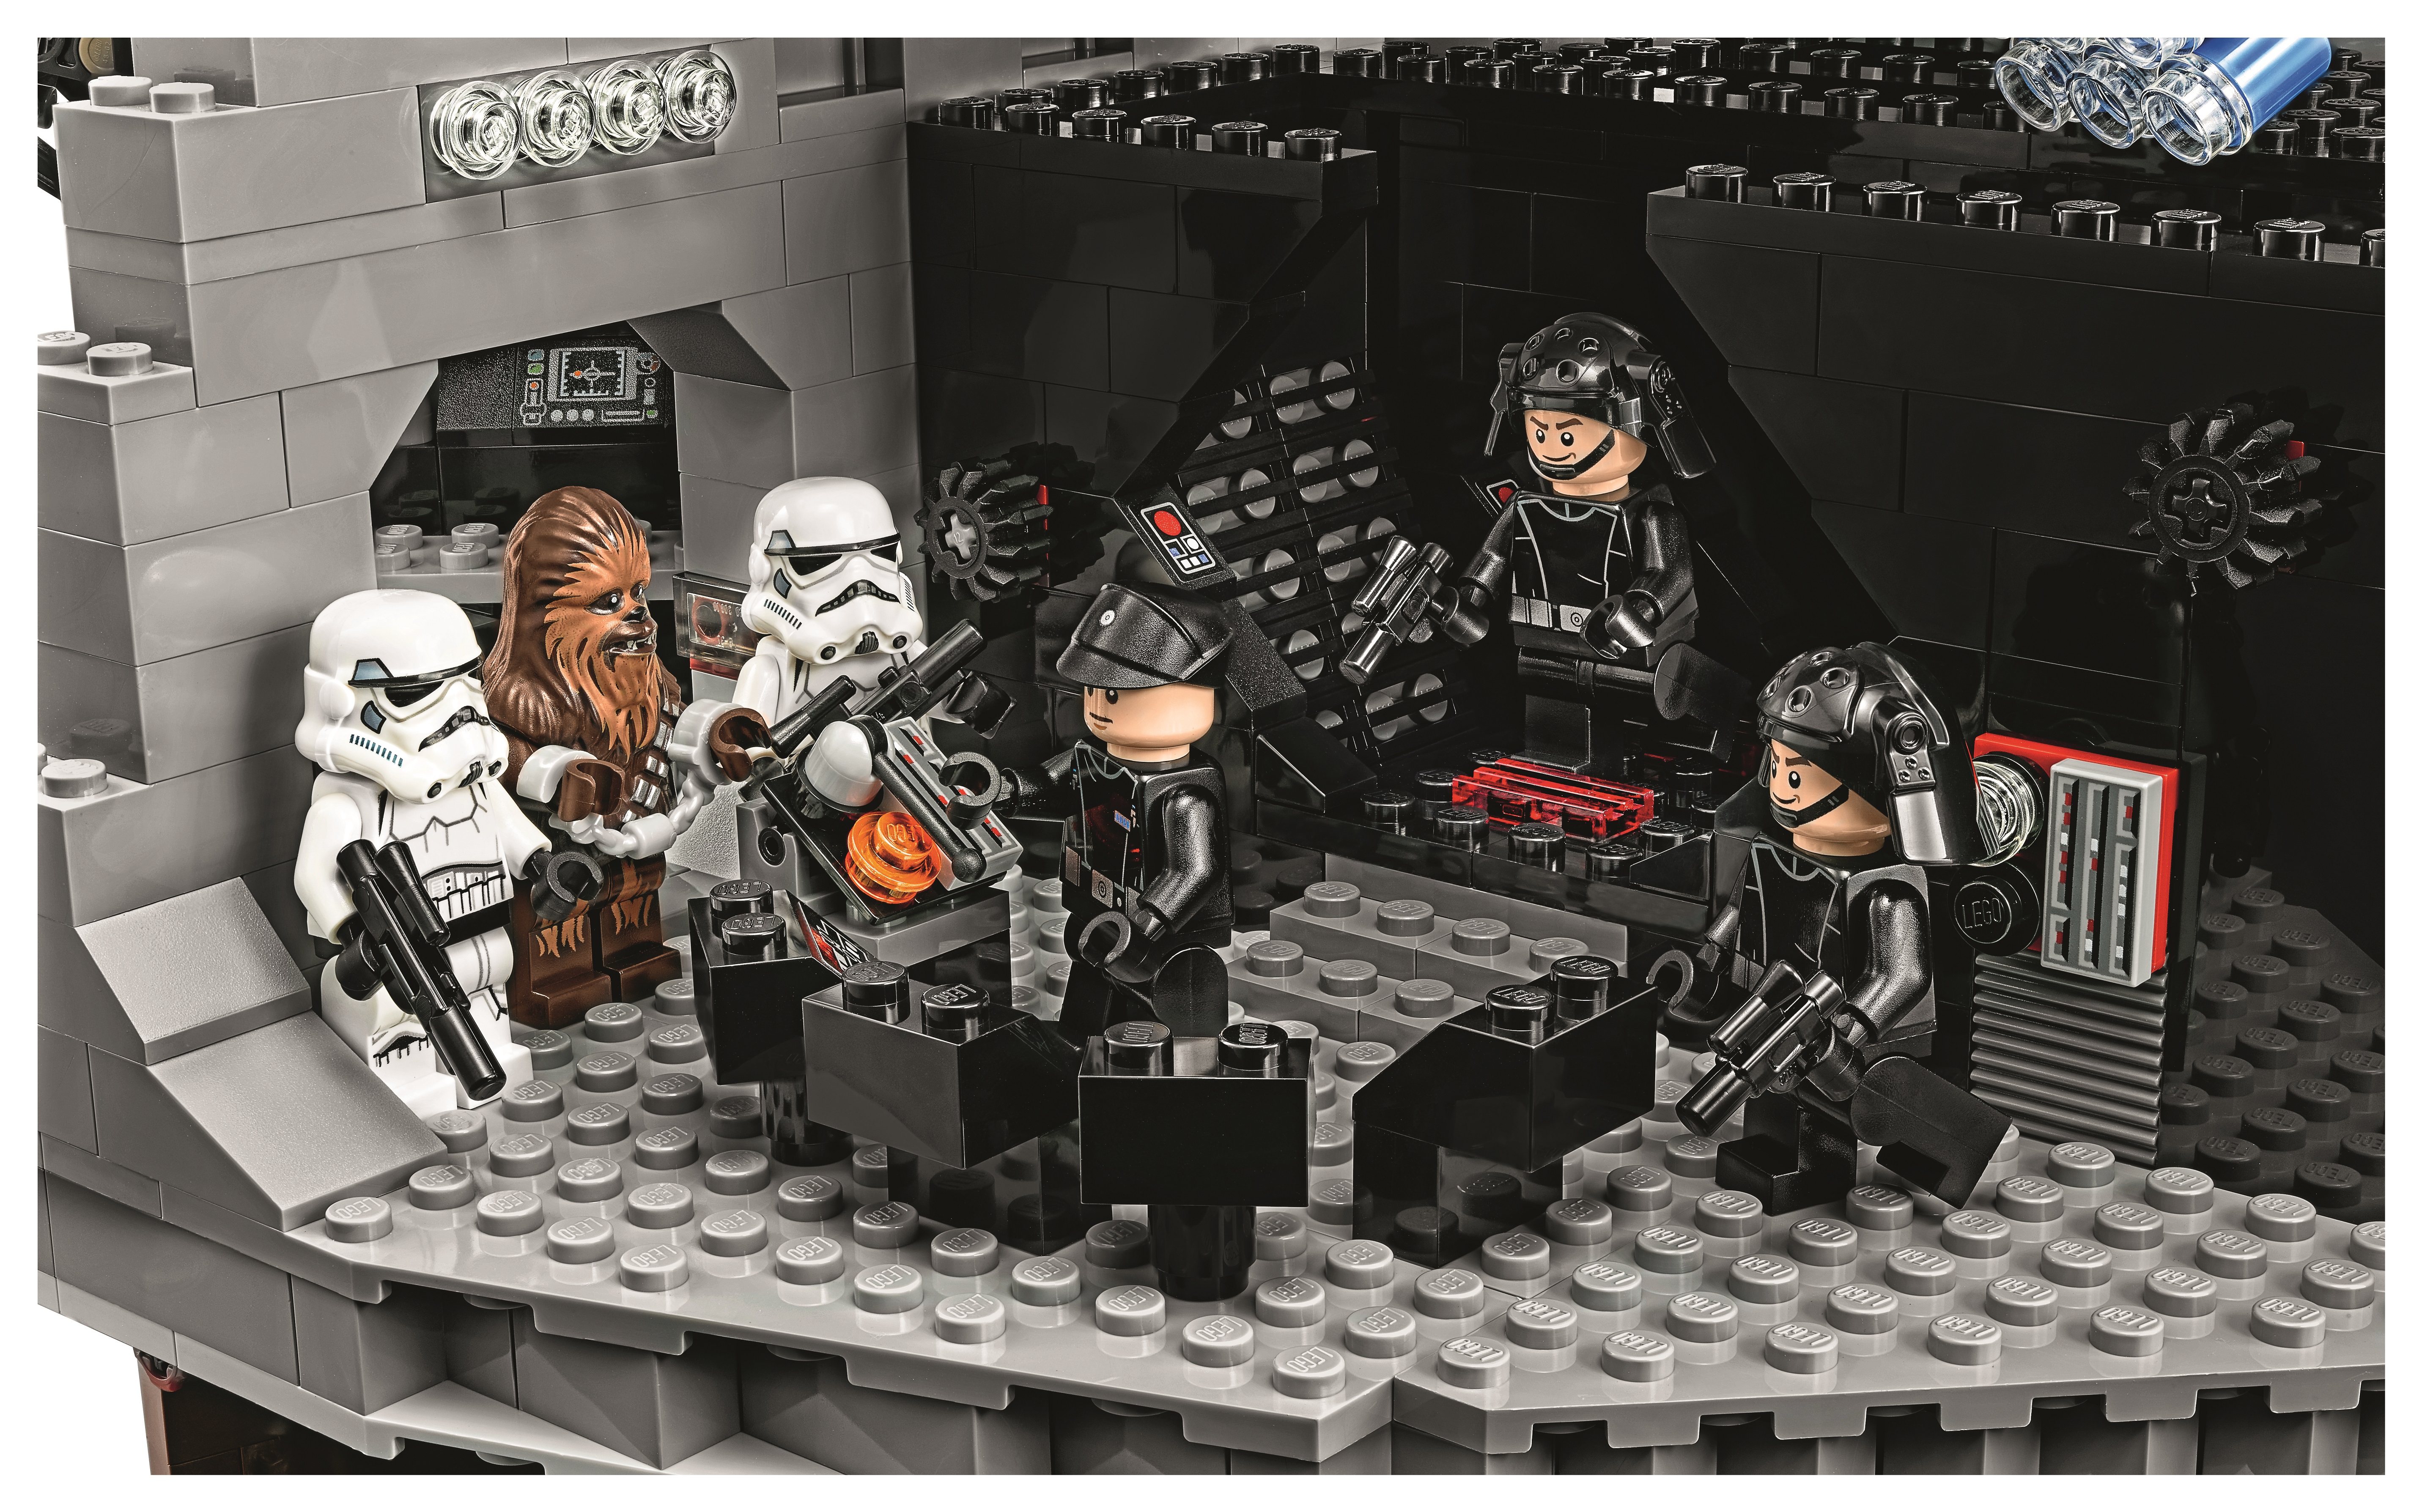 LEGO Star Wars Death Star Minifigures Han Solo & Chewbacca From Set 75159 